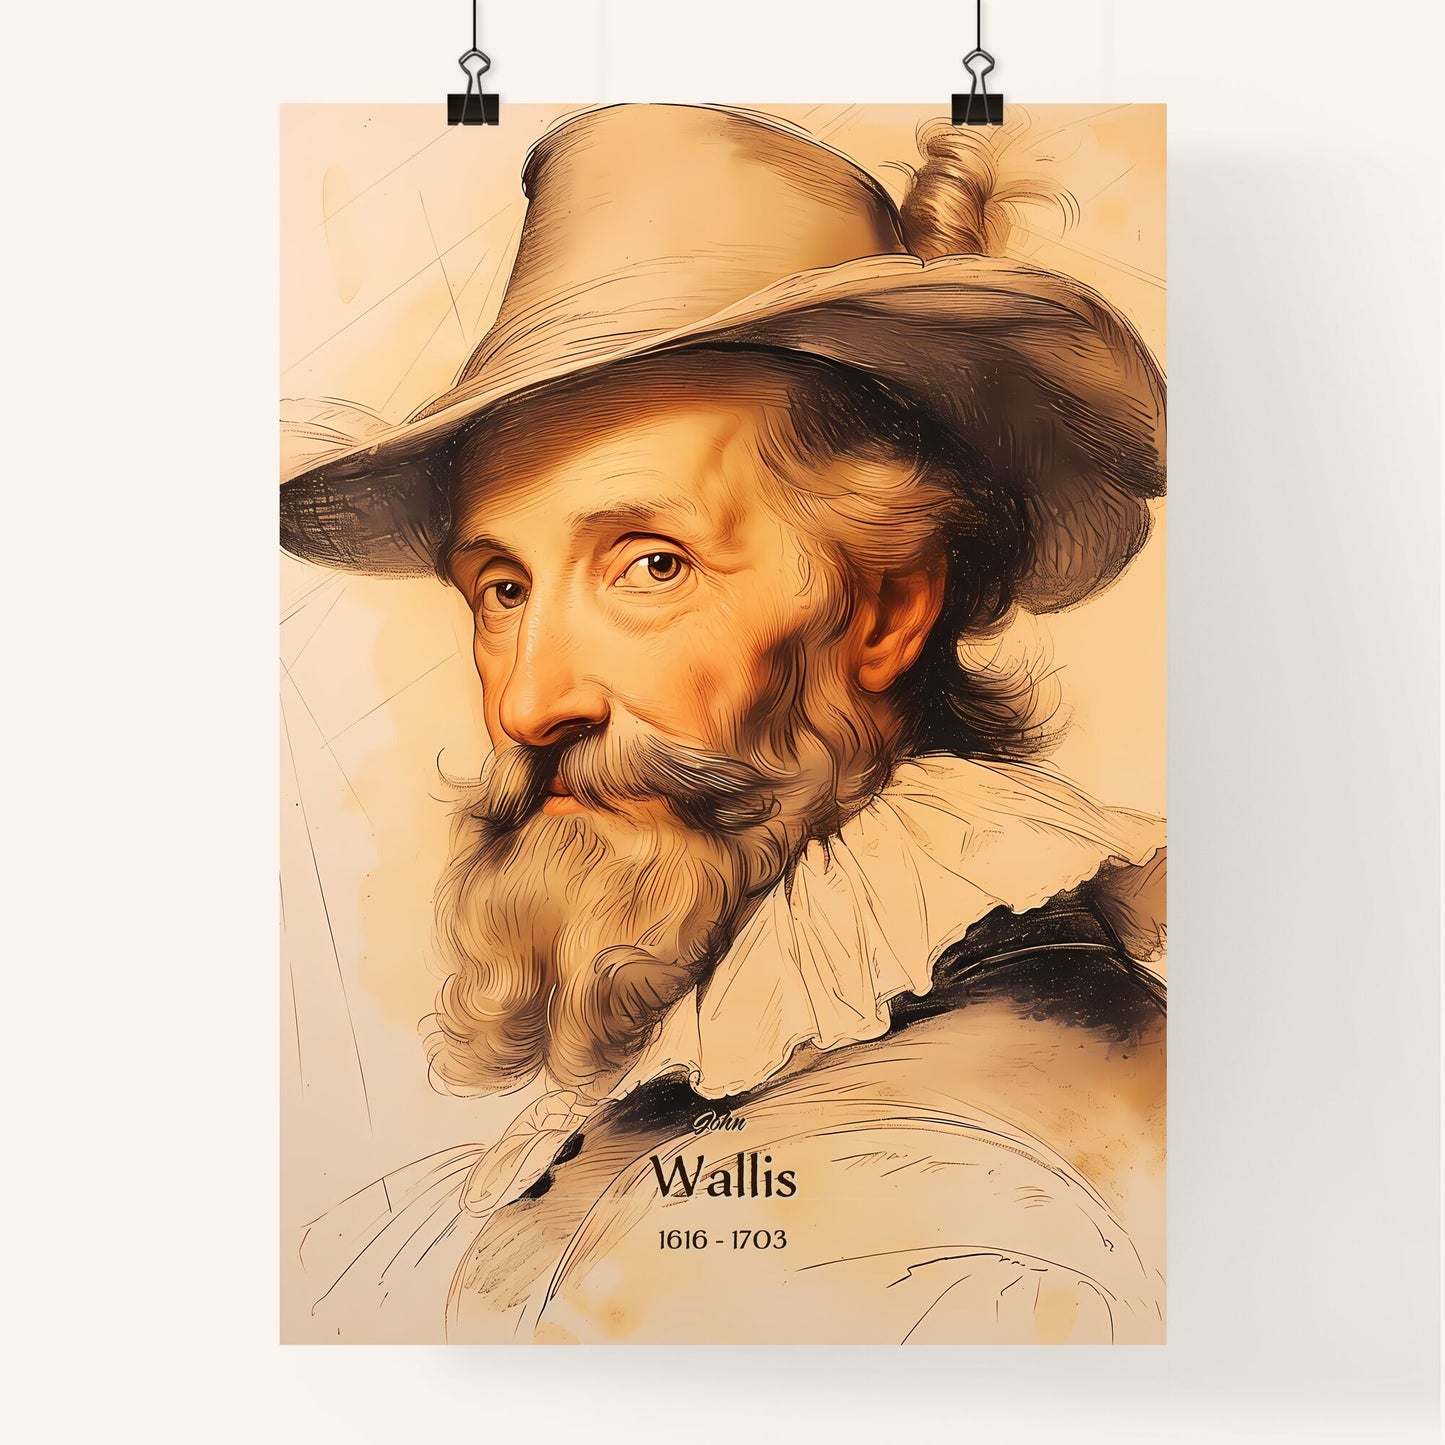 John, Wallis, 1616 - 1703, A Poster of a painting of a man with a hat Default Title